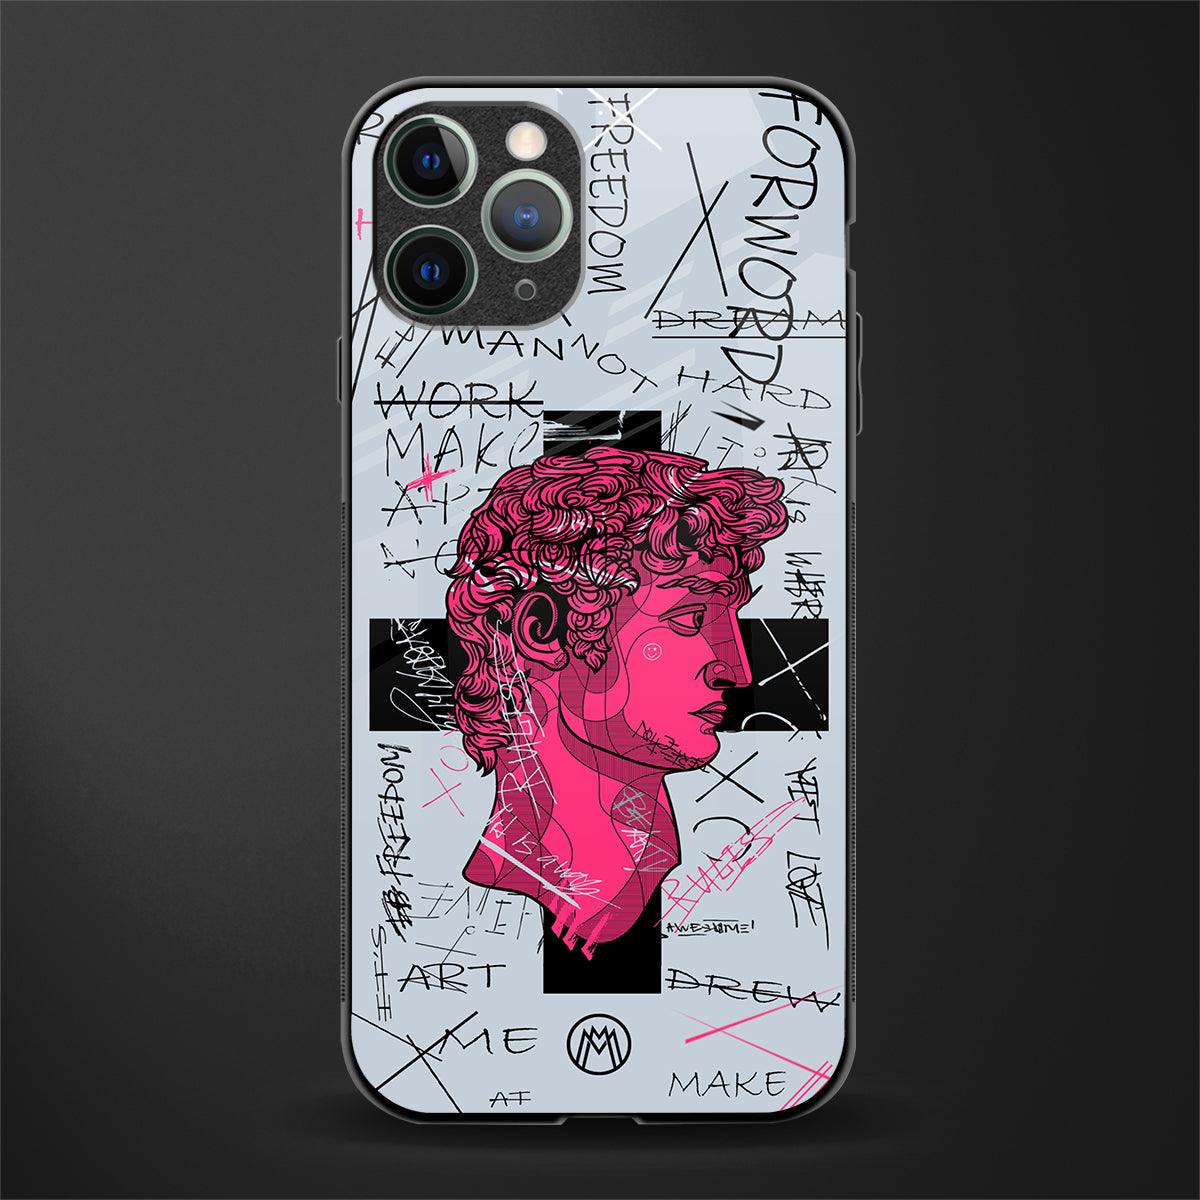 lost in reality david glass case for iphone 11 pro image